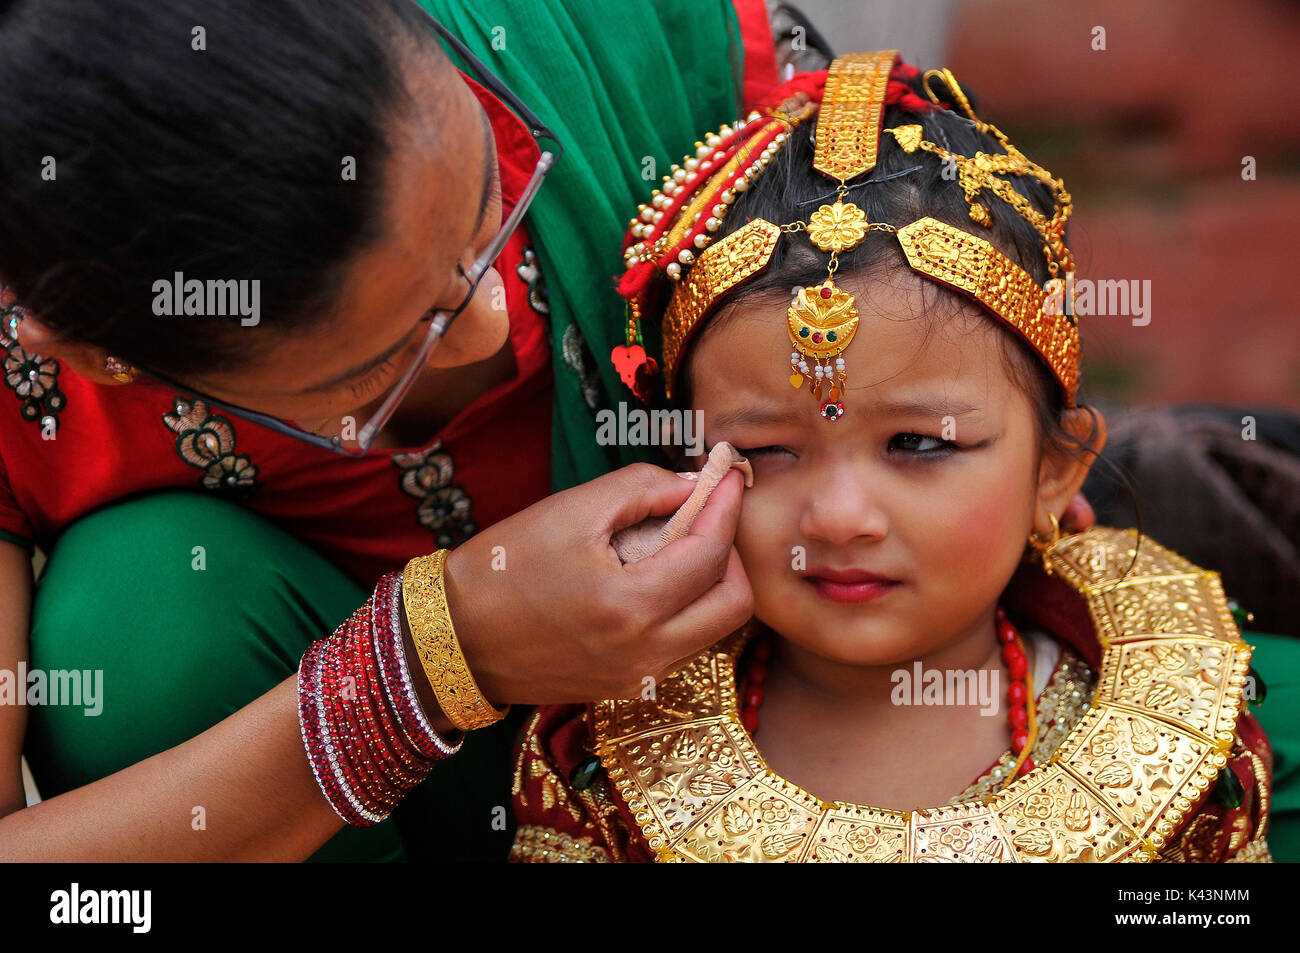 Kathmandu, Nepal. 04th Sep, 2017. A Nepalese mother cleans her daughter's face during celebration of Kumari puja at Basantapur Durbar Square, Katmandu, Nepal on Monday, September 04, 2017. Altogether 108 young girls under the age of nine gathered for the Kumari puja, a tradition of worshiping, which believes doing puja save small girls from diseases and bad luck in future. Credit: Narayan Maharjan/Pacific Press/Alamy Live News Stock Photo